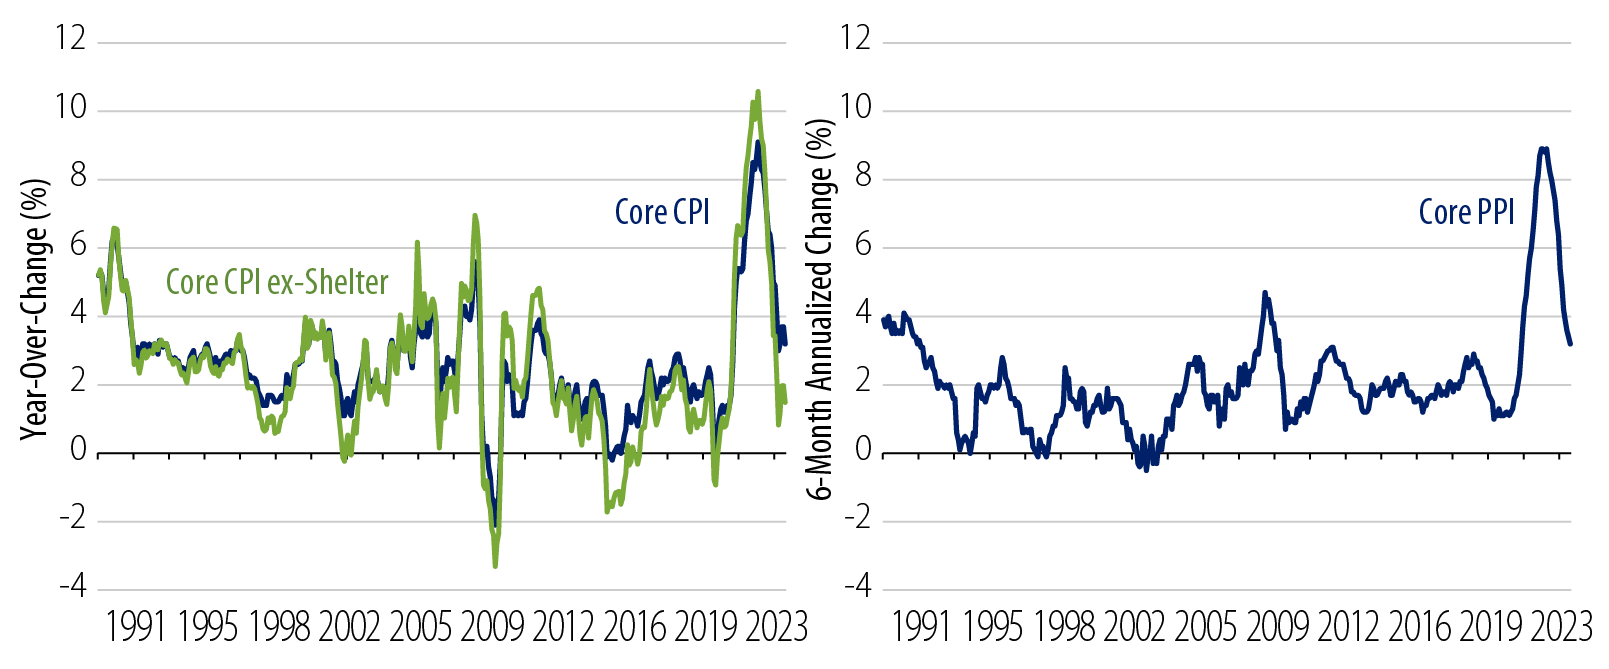 Explore Consumer Price Index (CPI) less shelter and the Producer Price Index (PPI)